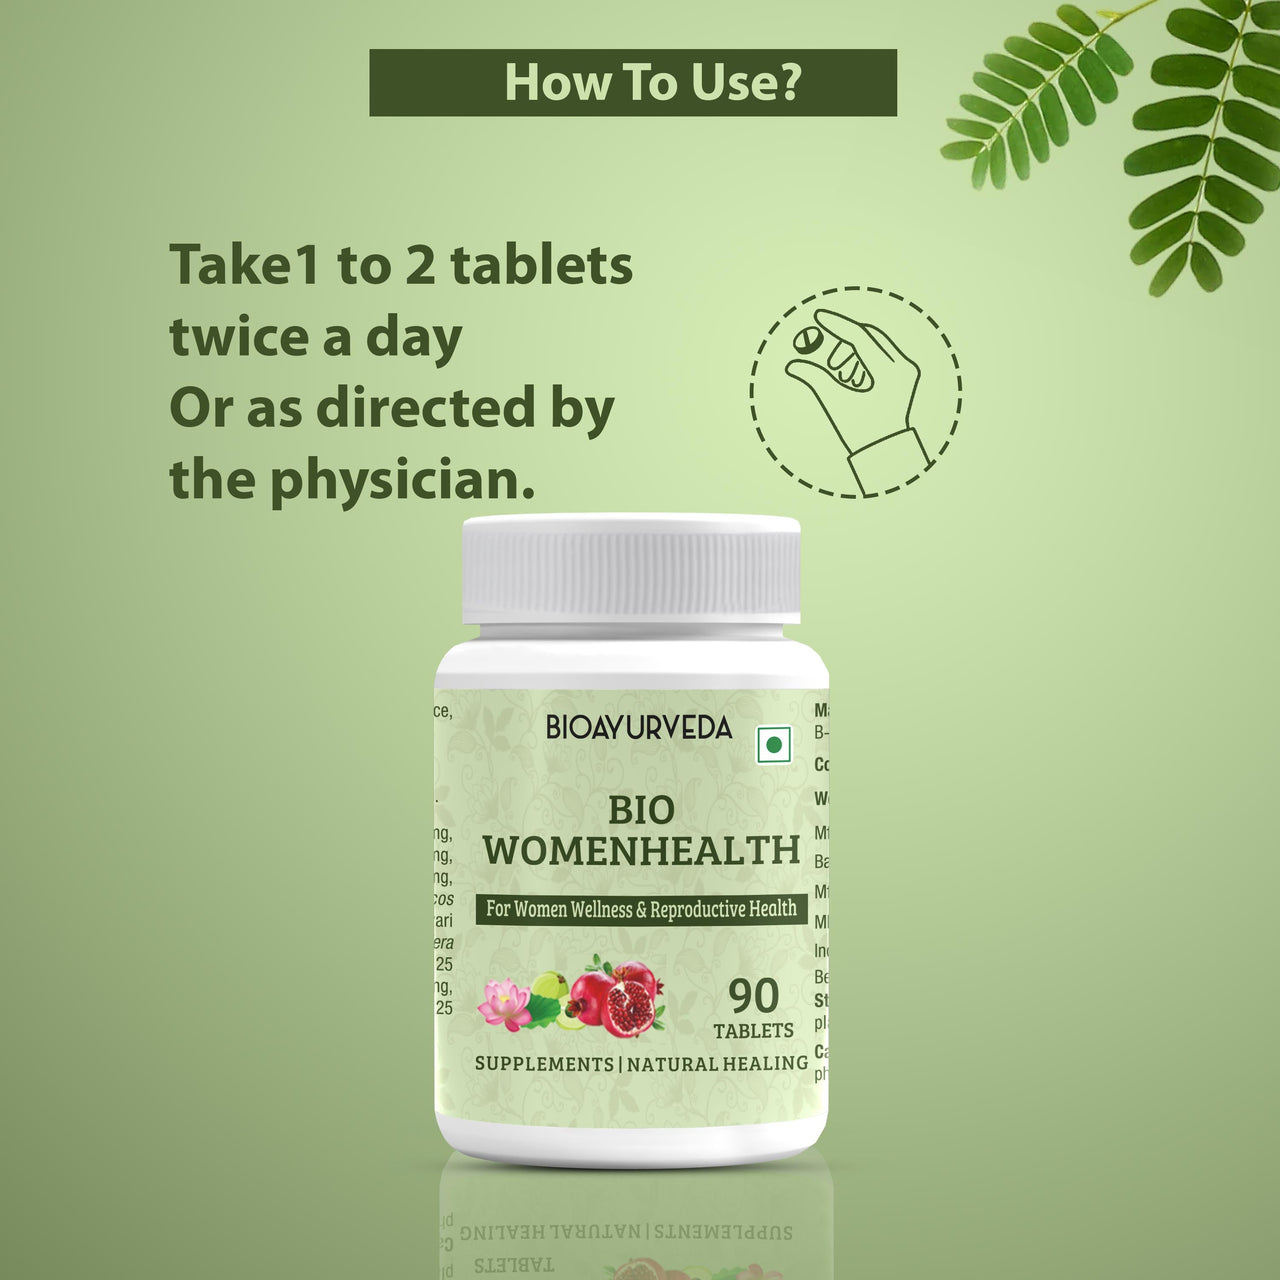 How To Use Bio Womenhealth Tablet